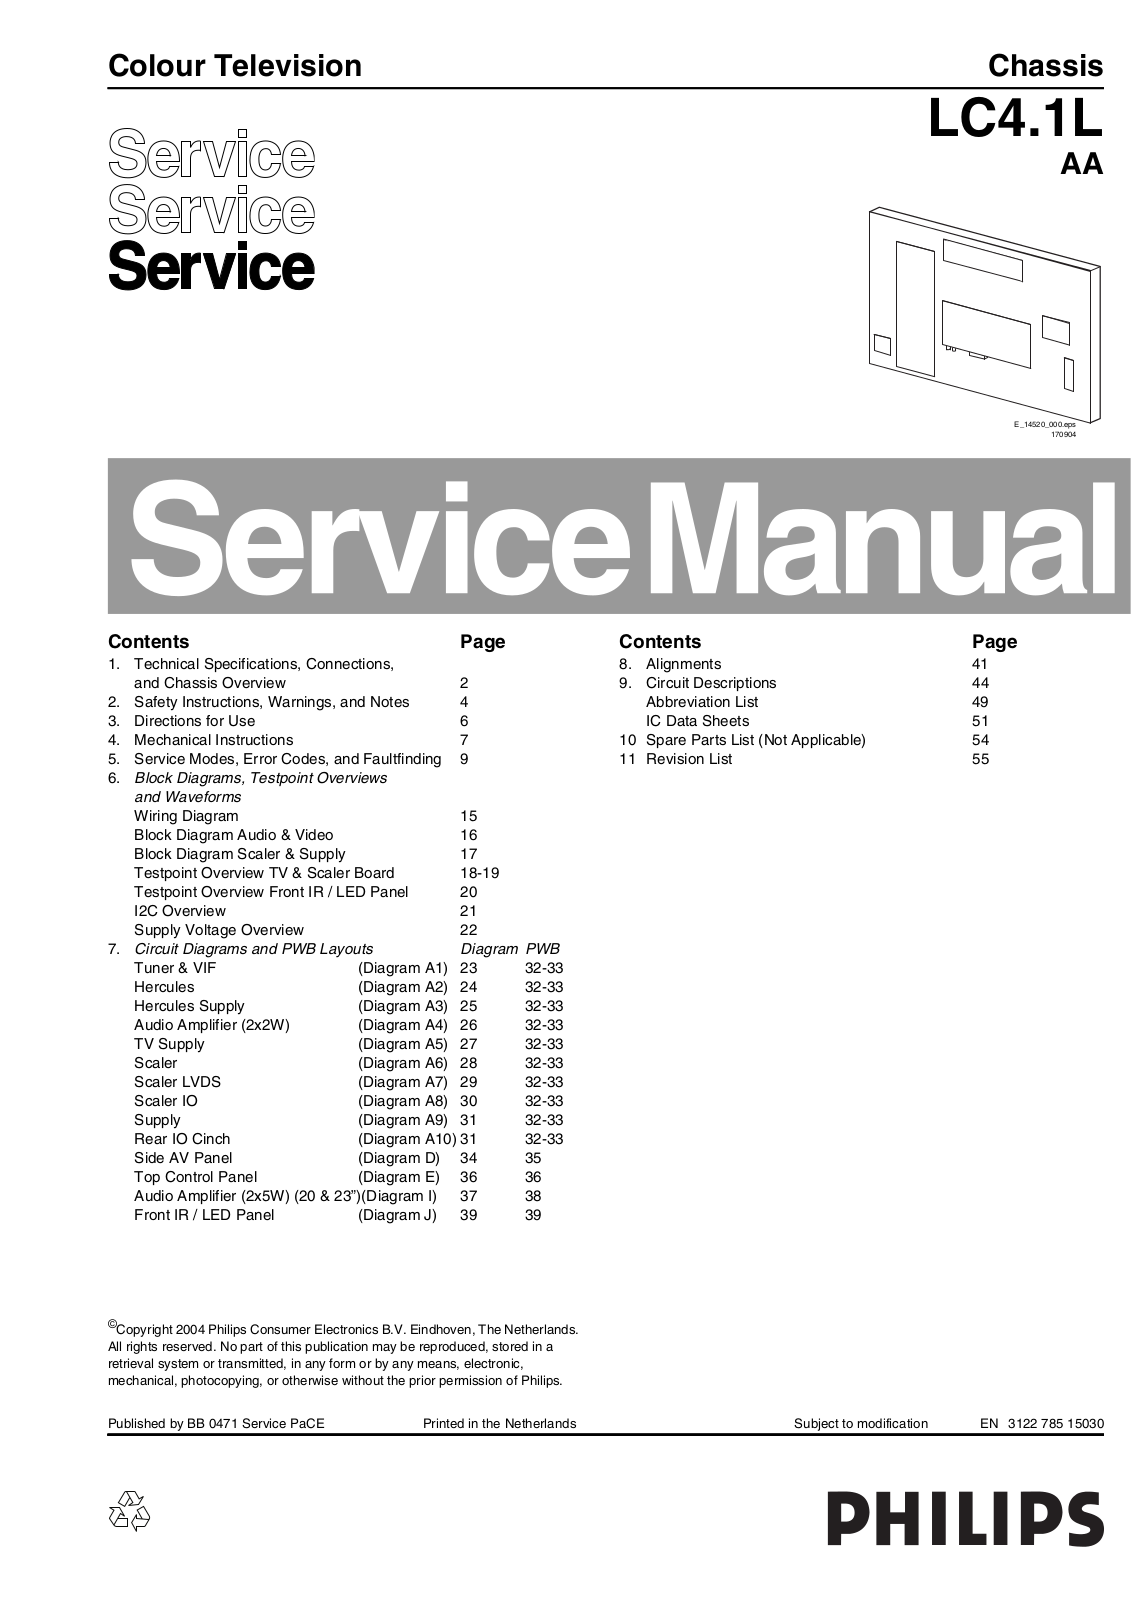 Philips LC4.1L AA Service Manual